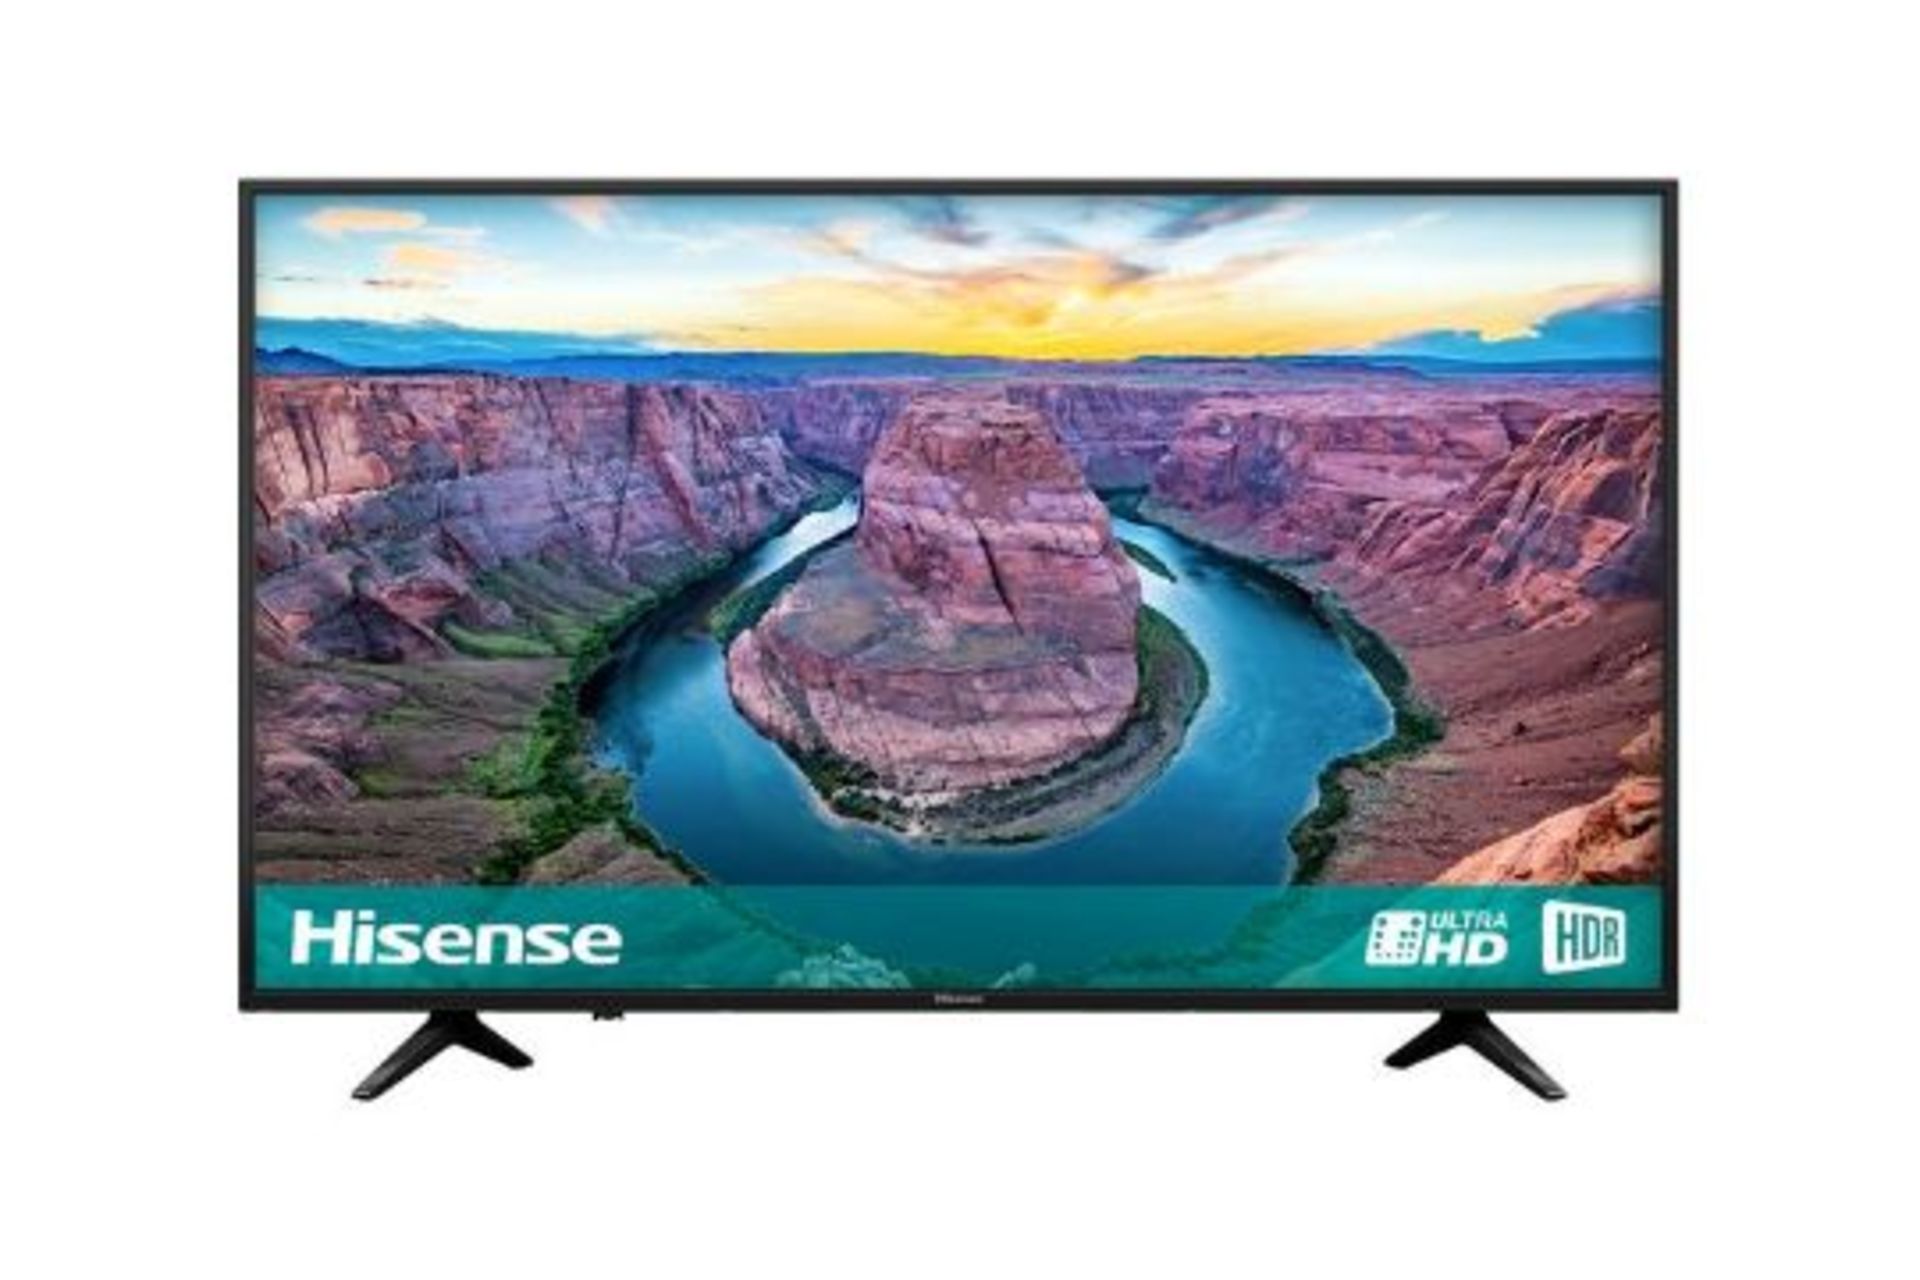 1 HISENSE H58AE6100UK 58" 4K ULTRA HD HDR SMART TV WITH REMOTE RRP Â£699 (POWERS ON BUT NOTHING ON